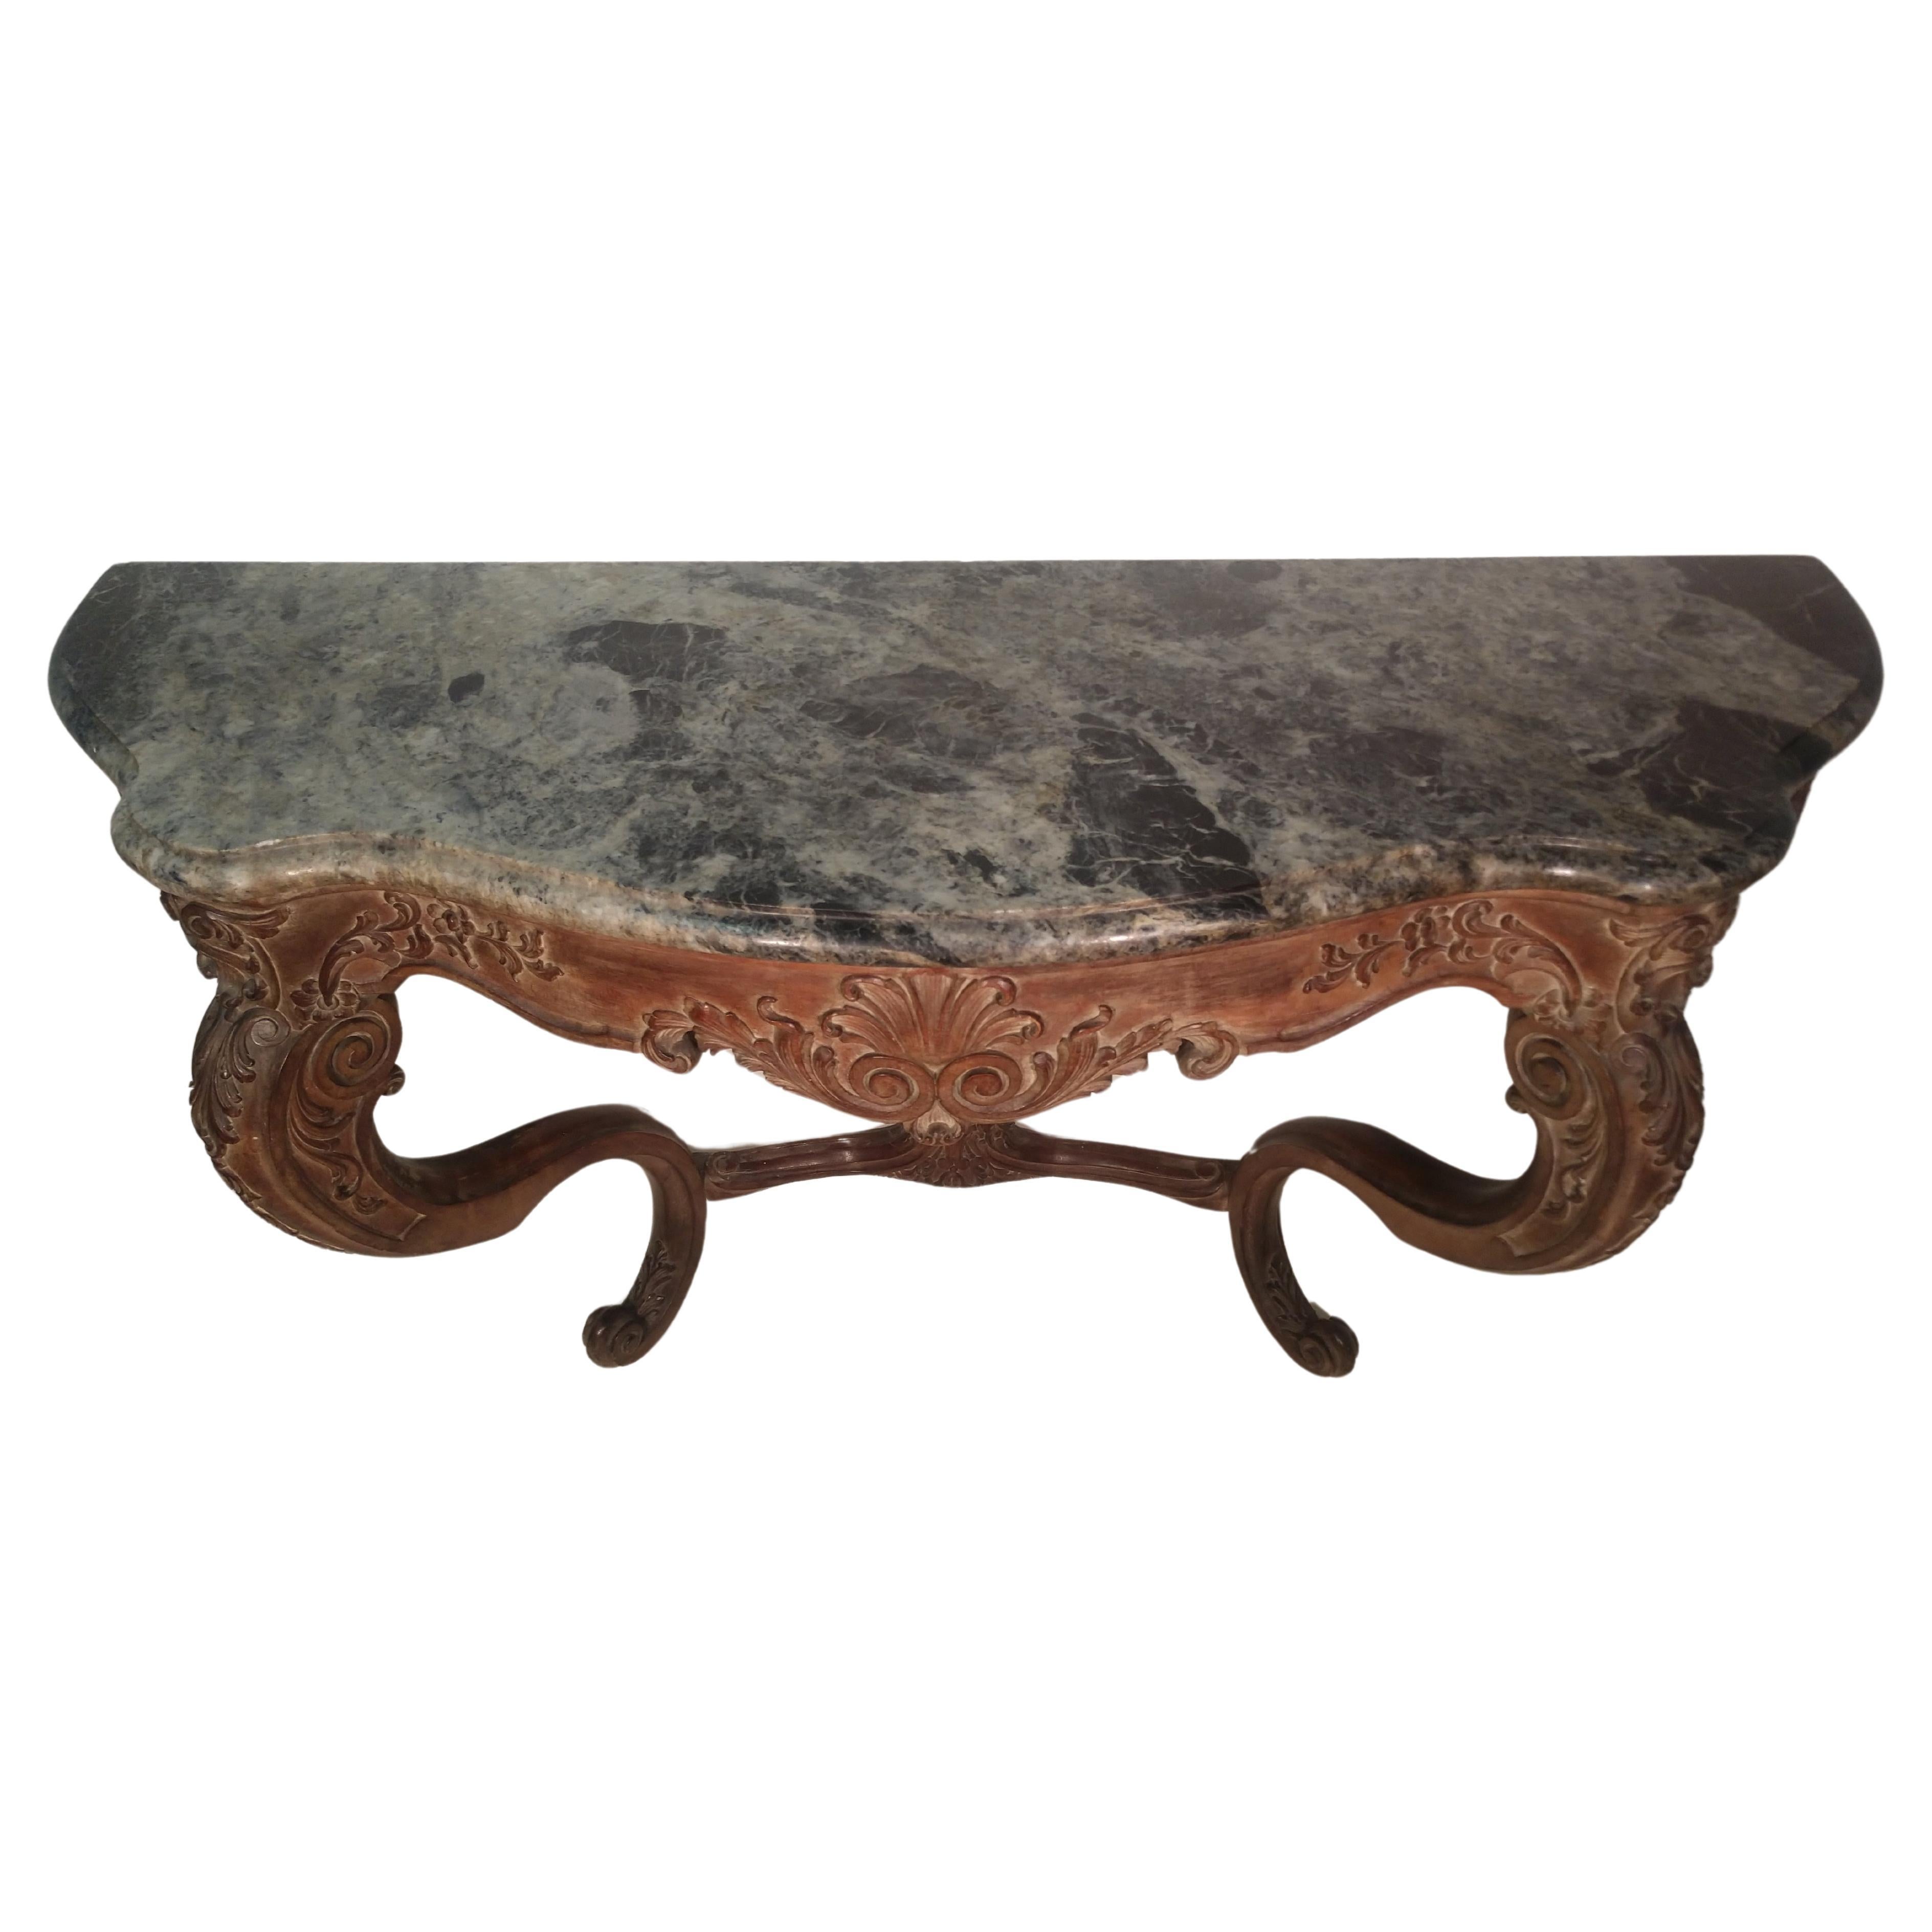 Fabulous carved serpentine console base dark green heavily veined marble. In the Rococo style with fabulous carvings on the legs and apron. Stamped Jansen in the walnut apron inside edge. Great for a dining area because of its size, 5 ft. Also as a